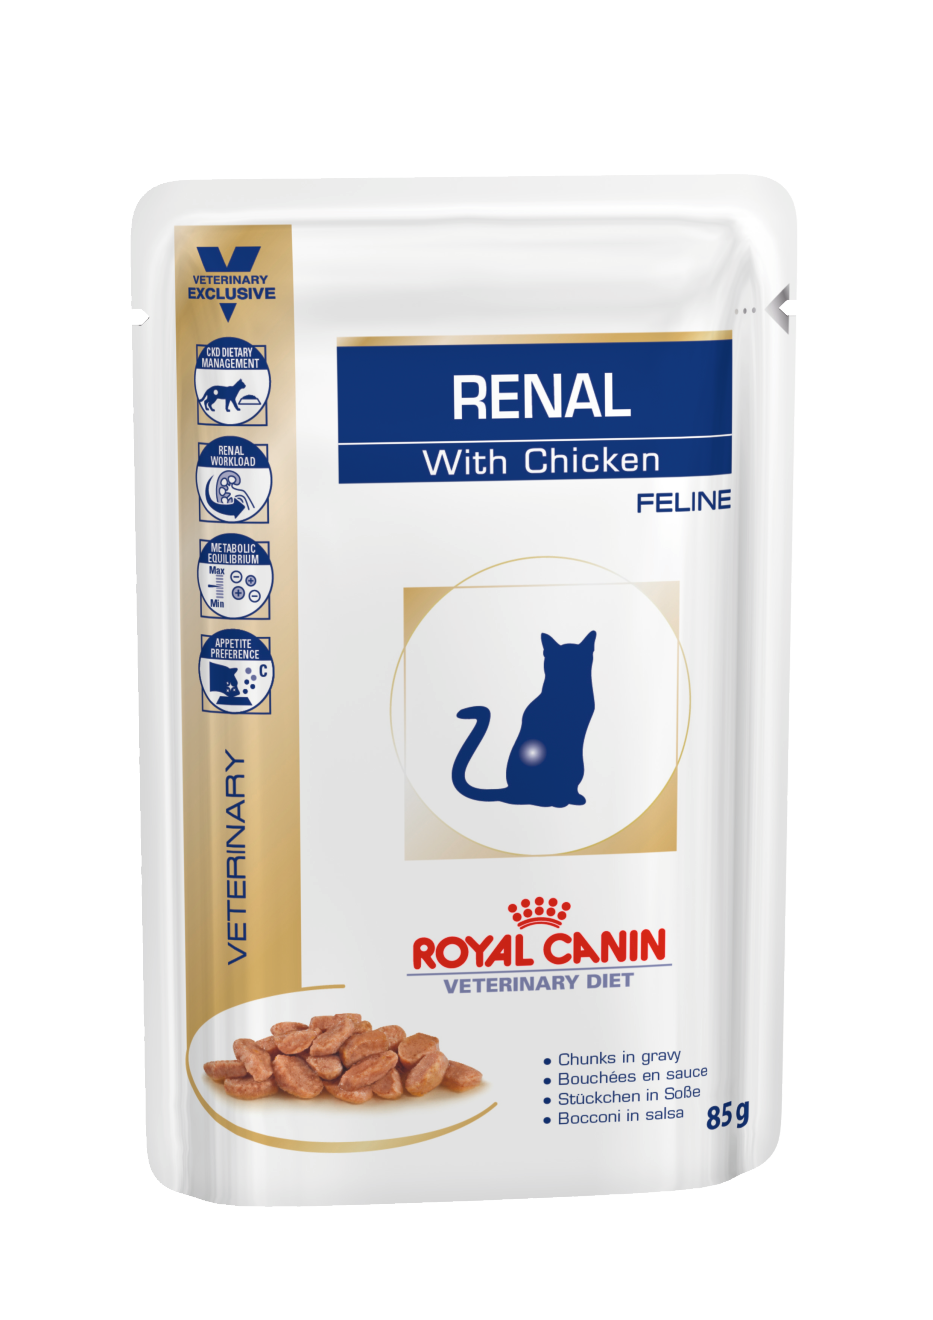 royal canin renal support a dry cat food